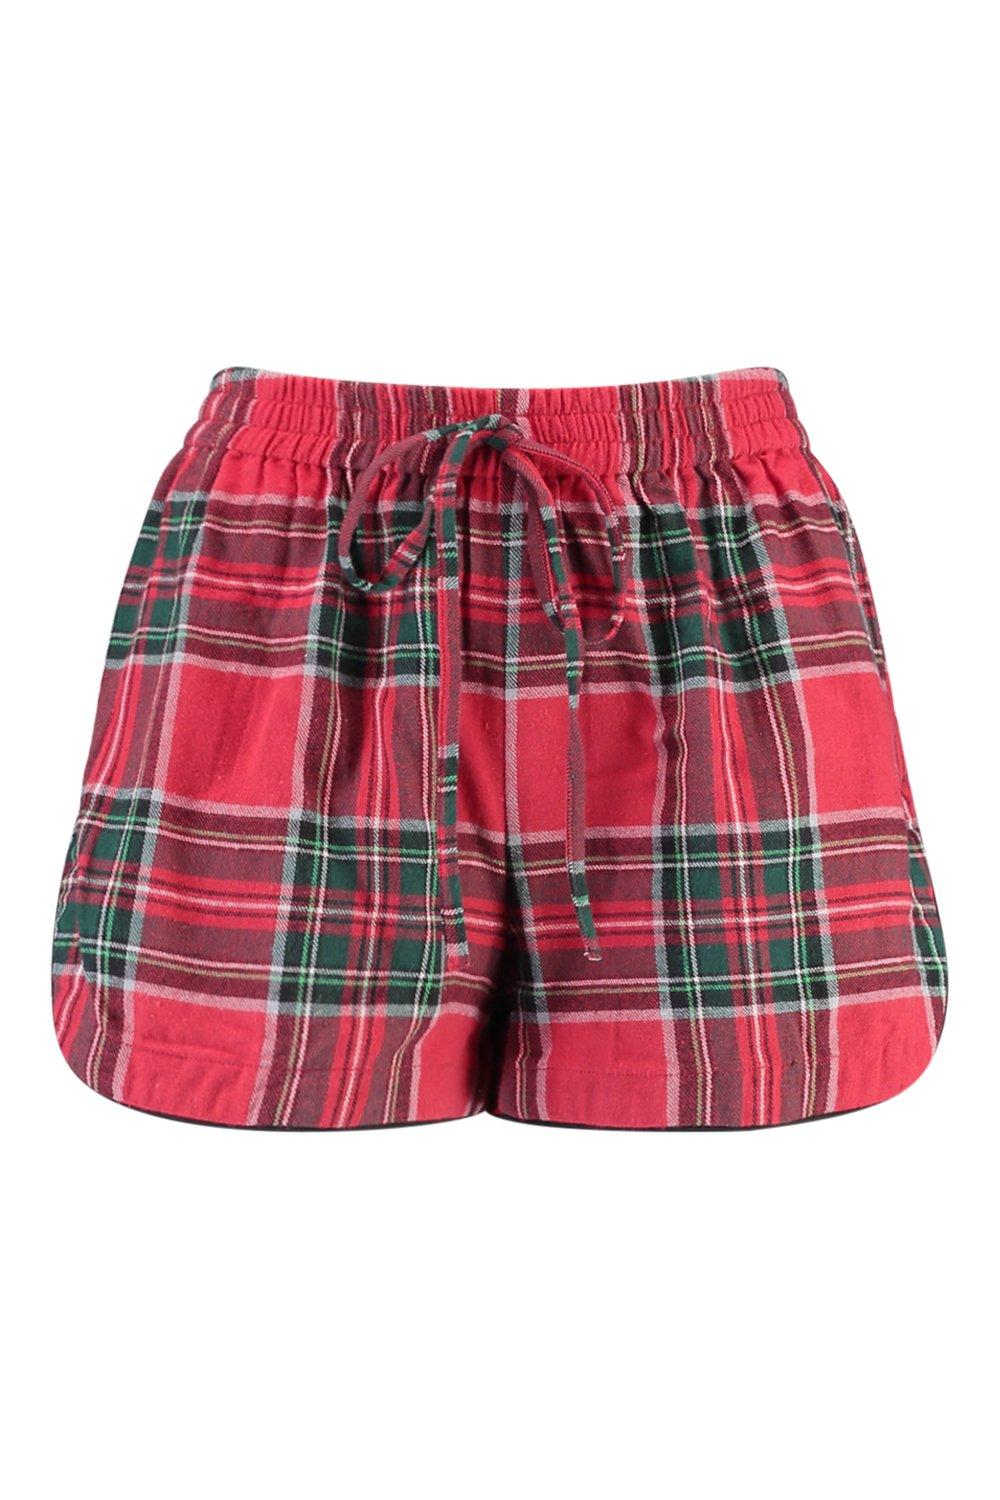 Flannel pajama shorts pair well with chocolate : r/sewing